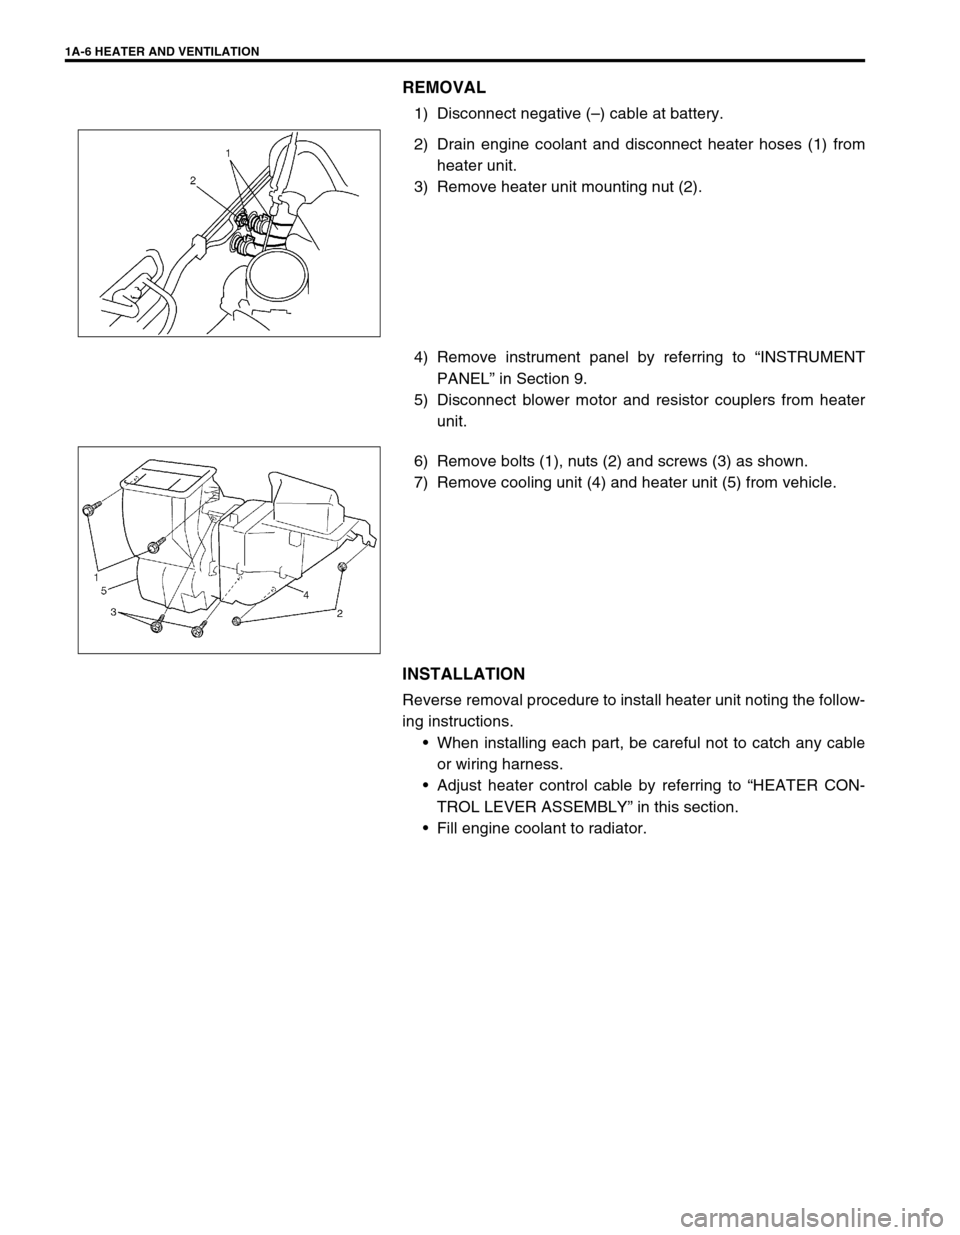 SUZUKI SWIFT 2000 1.G RG413 Service Workshop Manual 1A-6 HEATER AND VENTILATION
REMOVAL
1) Disconnect negative (–) cable at battery.
2) Drain engine coolant and disconnect heater hoses (1) from
heater unit.
3) Remove heater unit mounting nut (2).
4) 